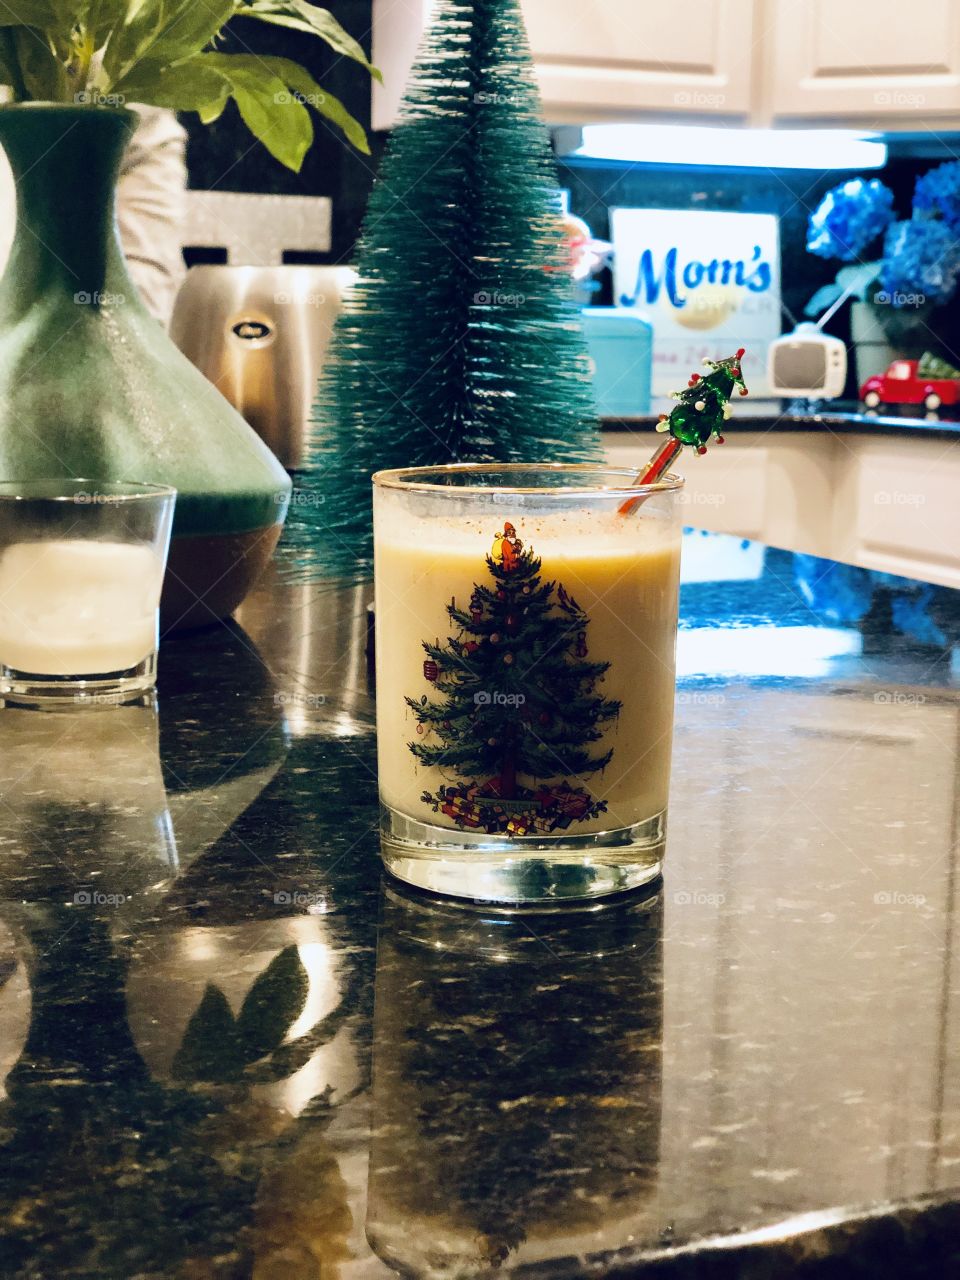 Cheers to the holidays!